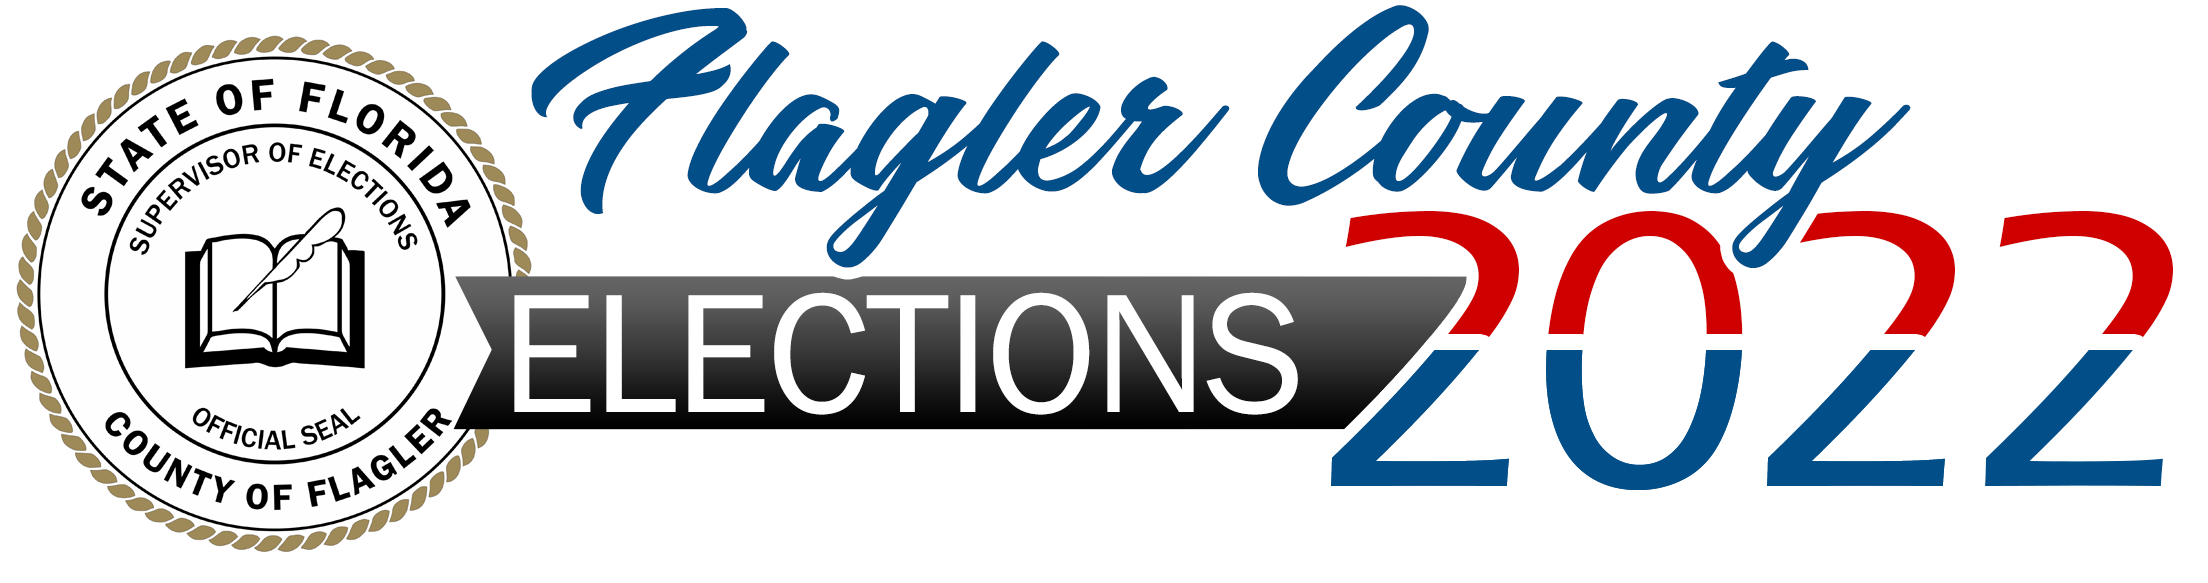 Are You Election Ready? Flagler County Elections 2022